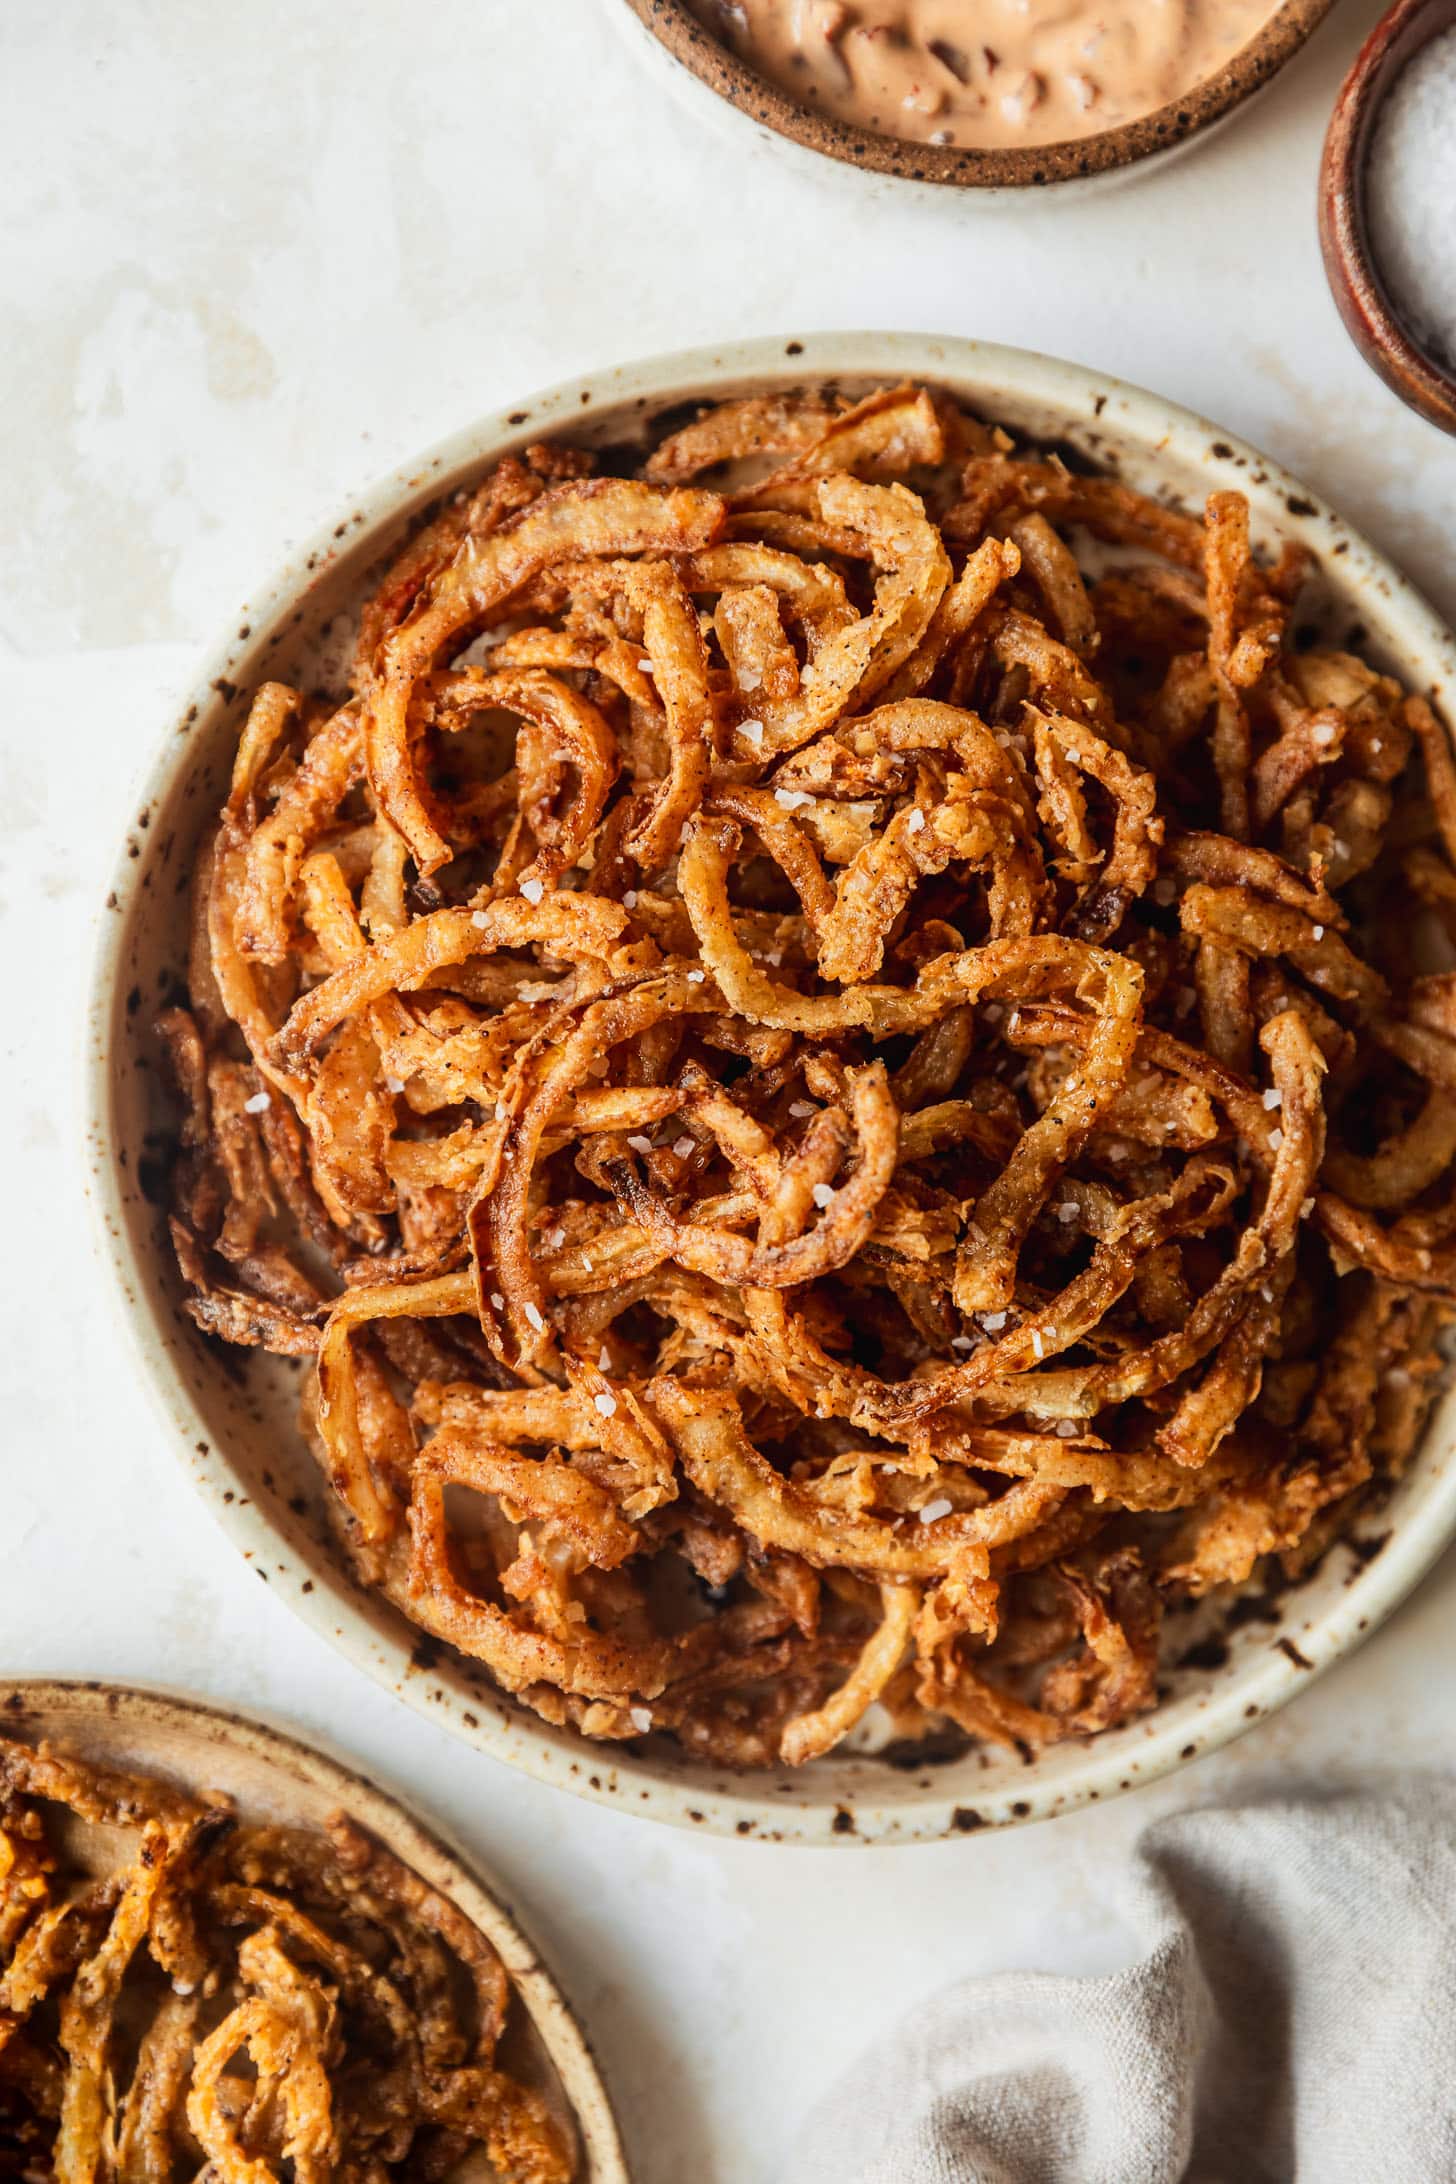 A tan speckled plate with crispy frizzled onions on a beige counter next to a tan plate of shoestring onions, wood bowl of salt, and brown bowl of chipotle aioli.